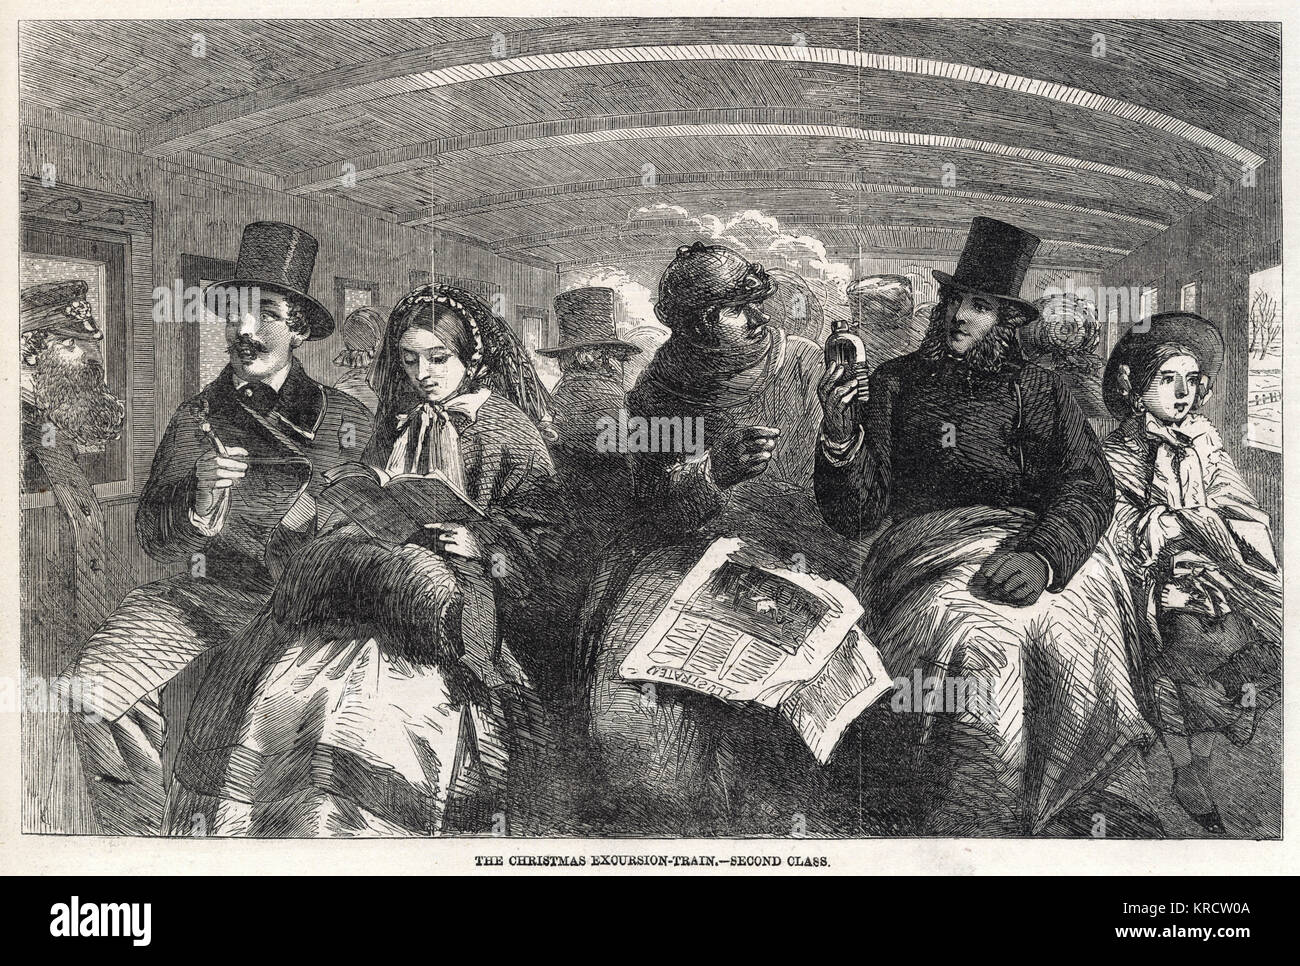 Crowed Second class passengers on their way home for Christmas. Date: 1859 Stock Photo